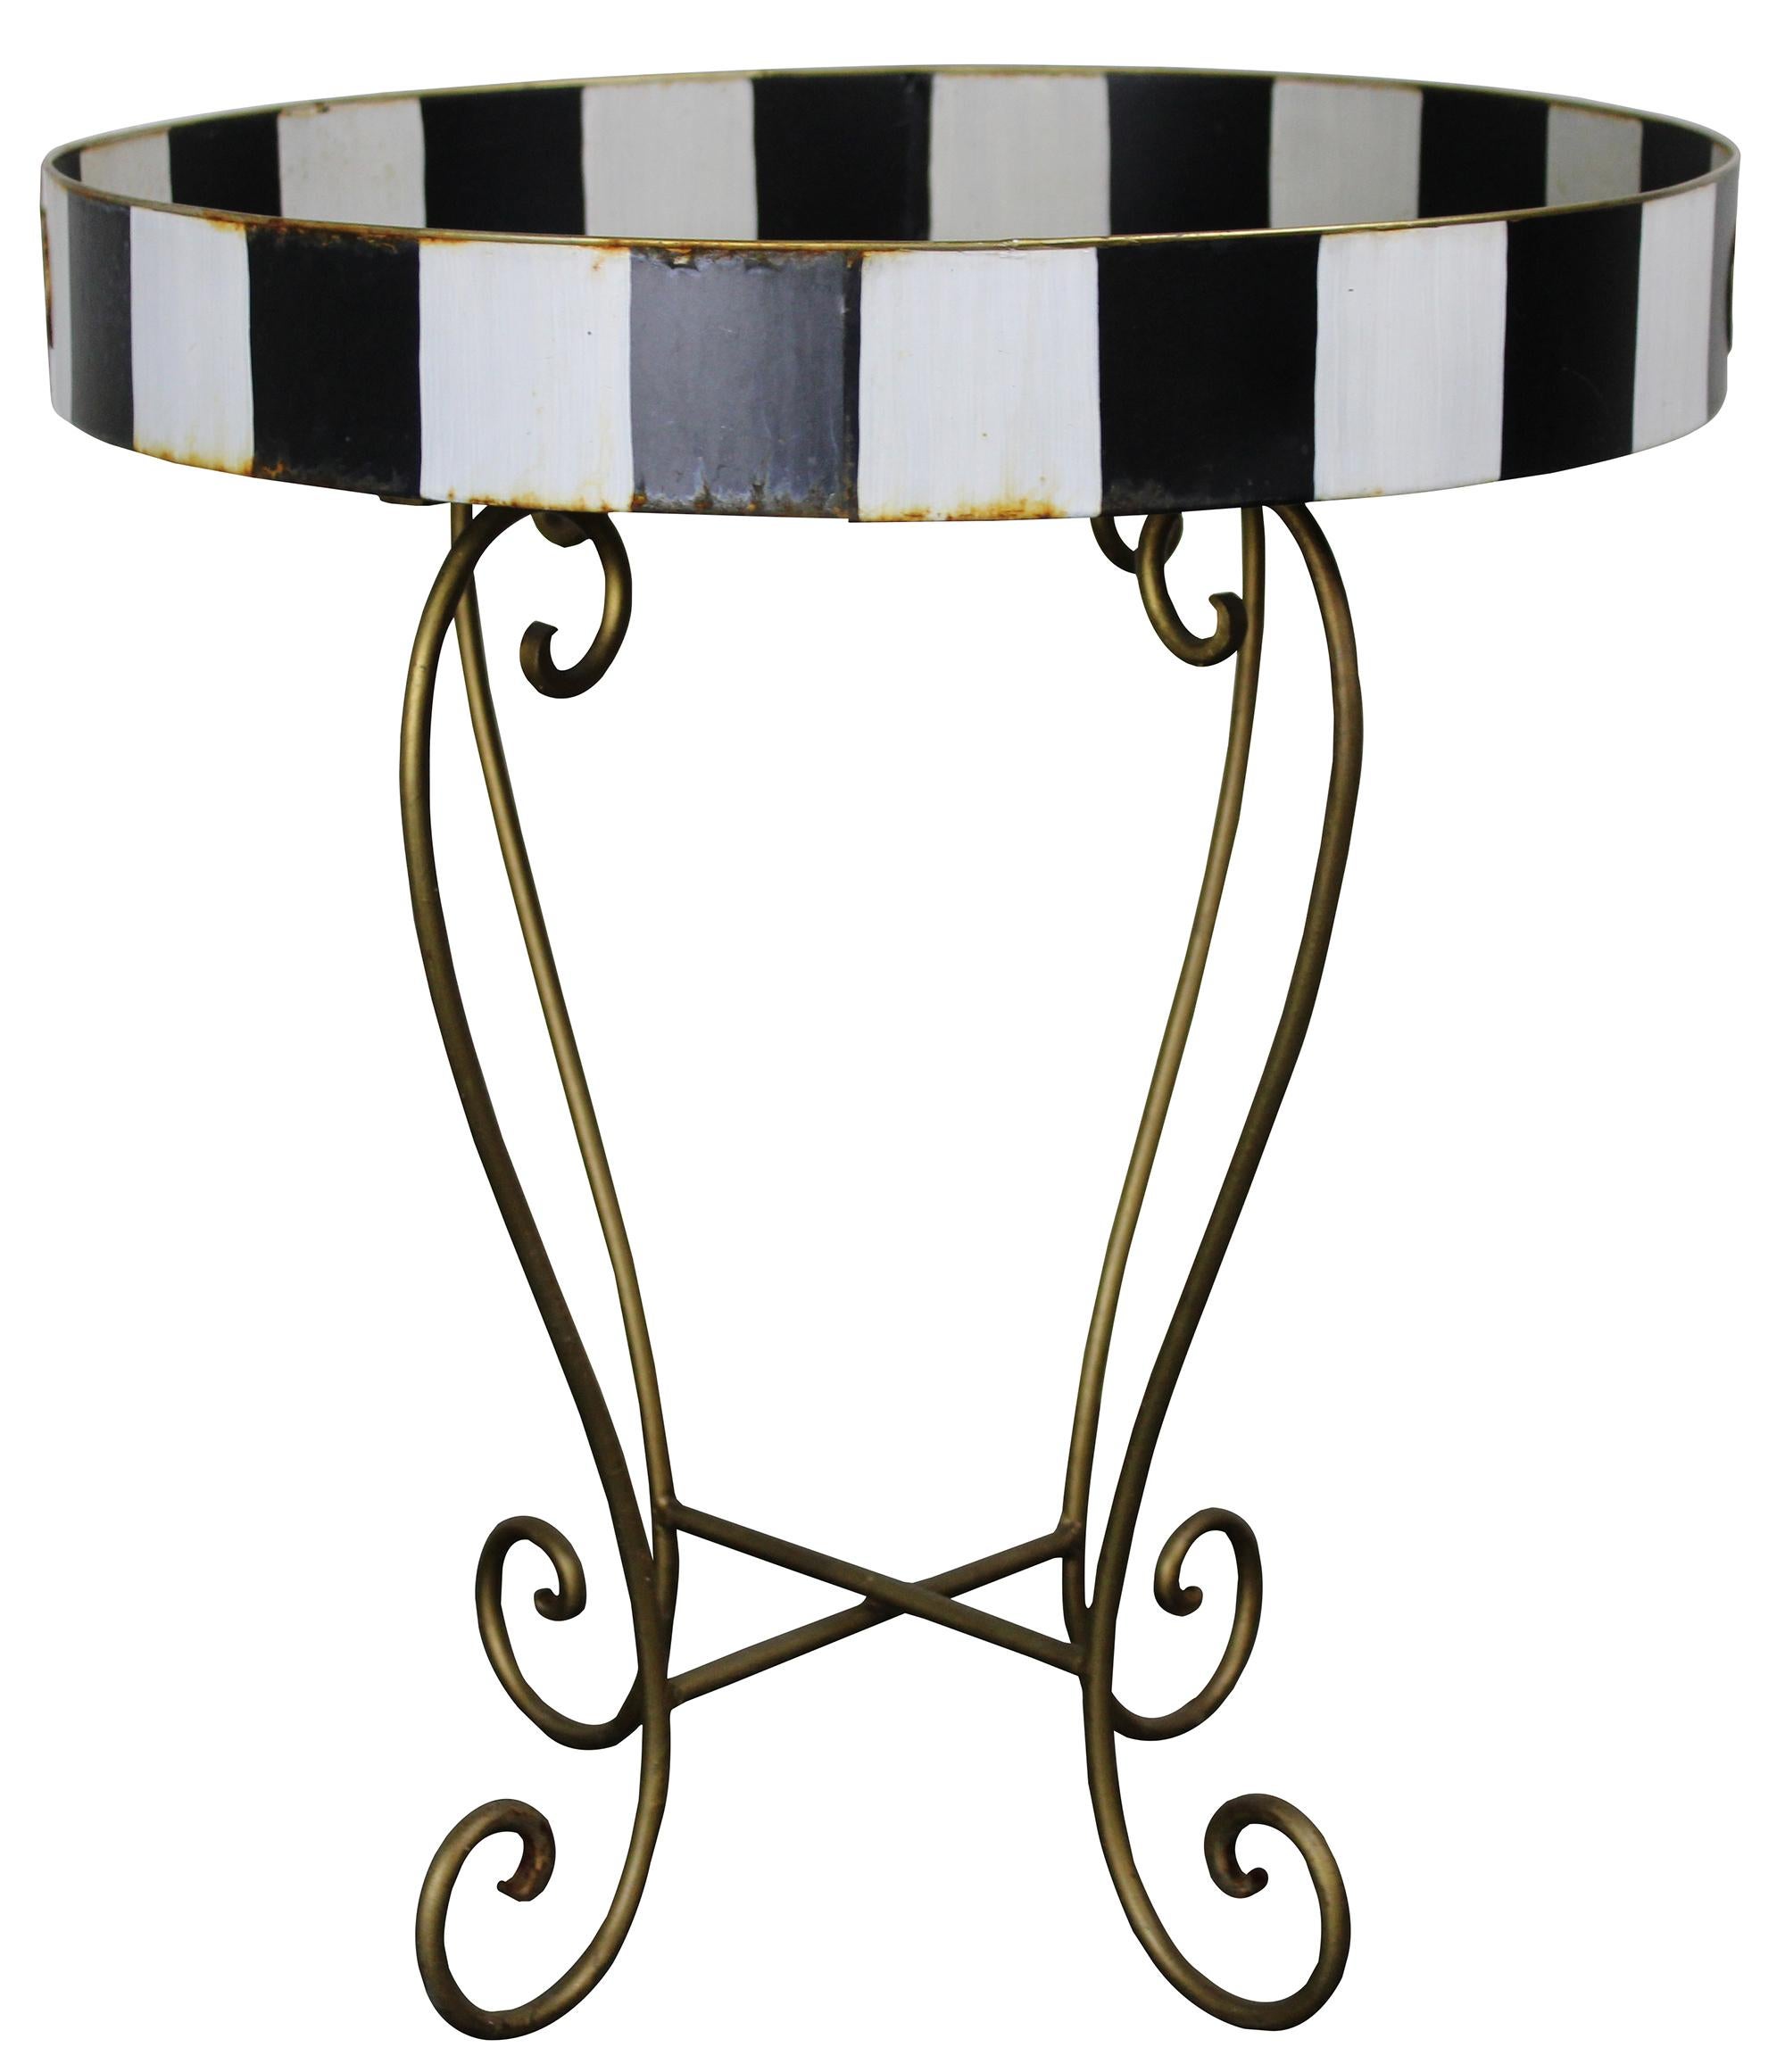 Vintage hand painted metal tray table. Features black and white painted tole tray and base.

Measures: Base: 12